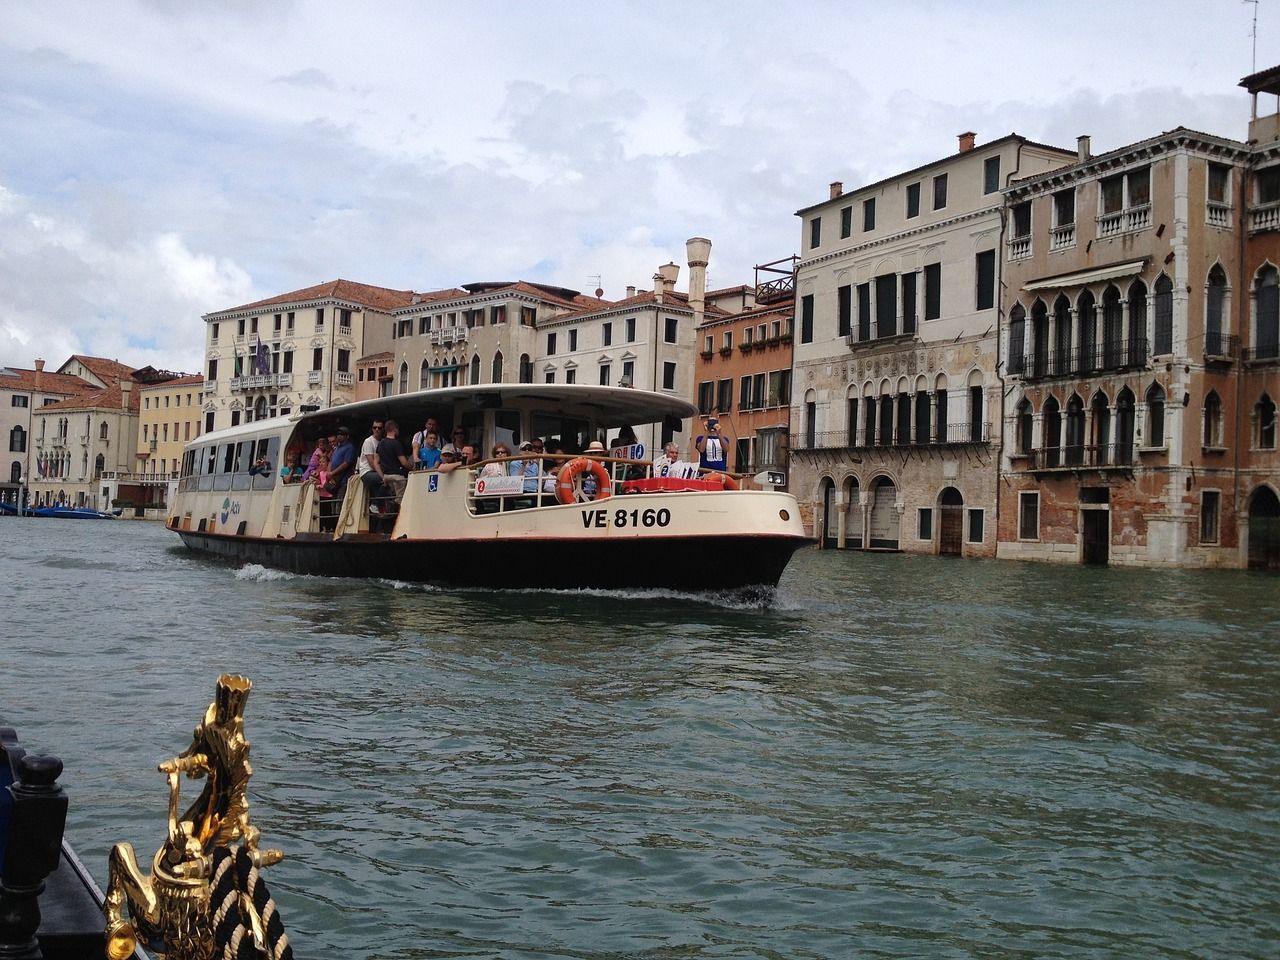 Moving around Venice: walking or by boat?